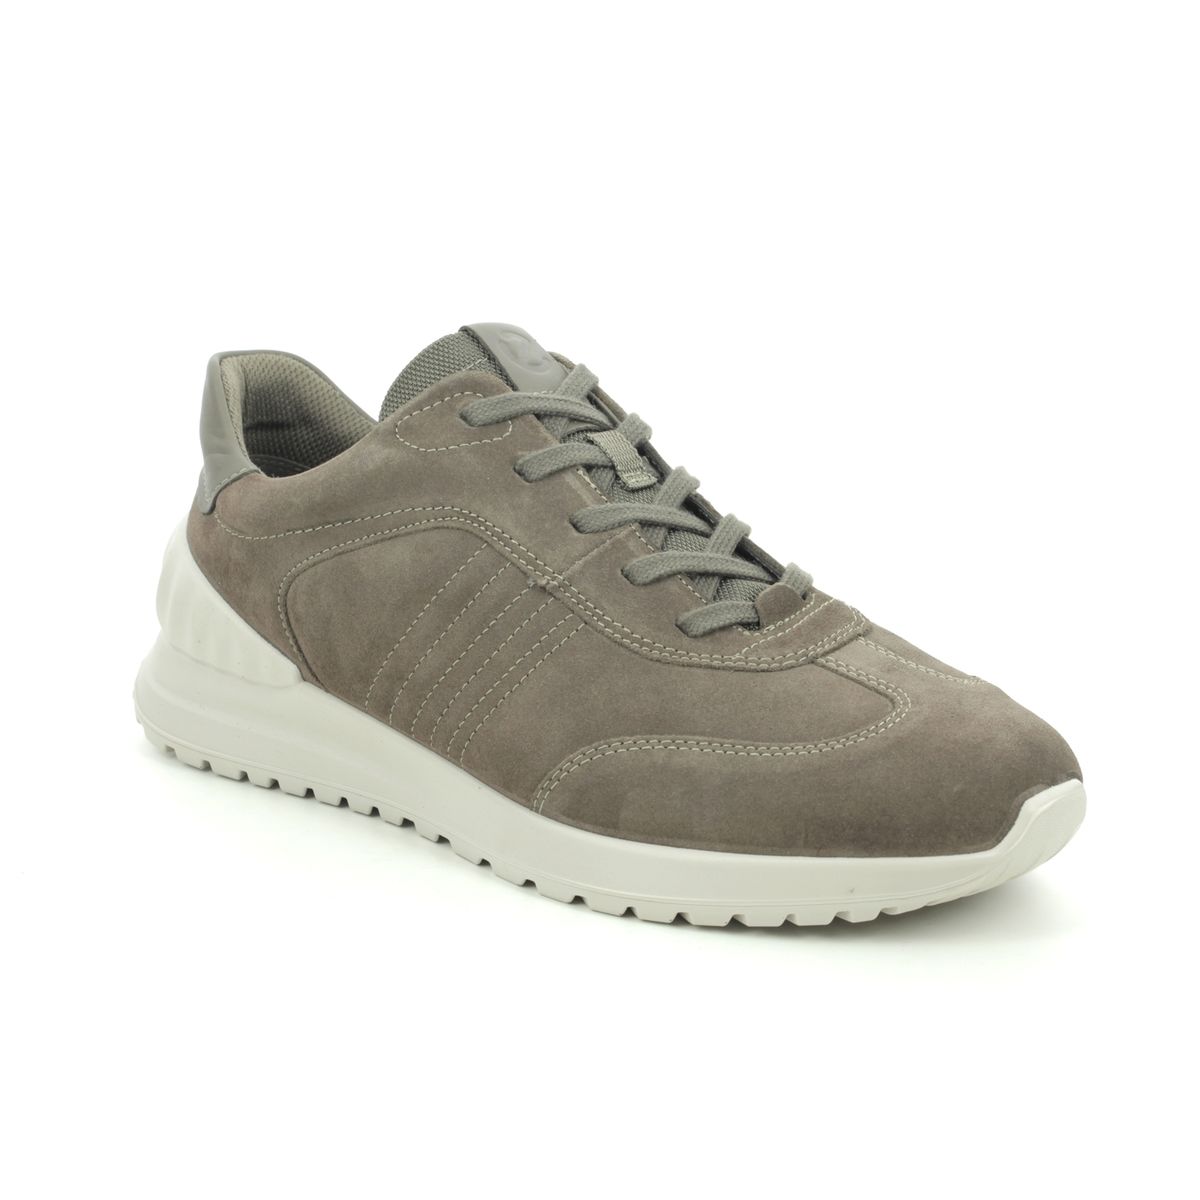 ECCO Astir Lite 503704-57181 Taupe suede trainers